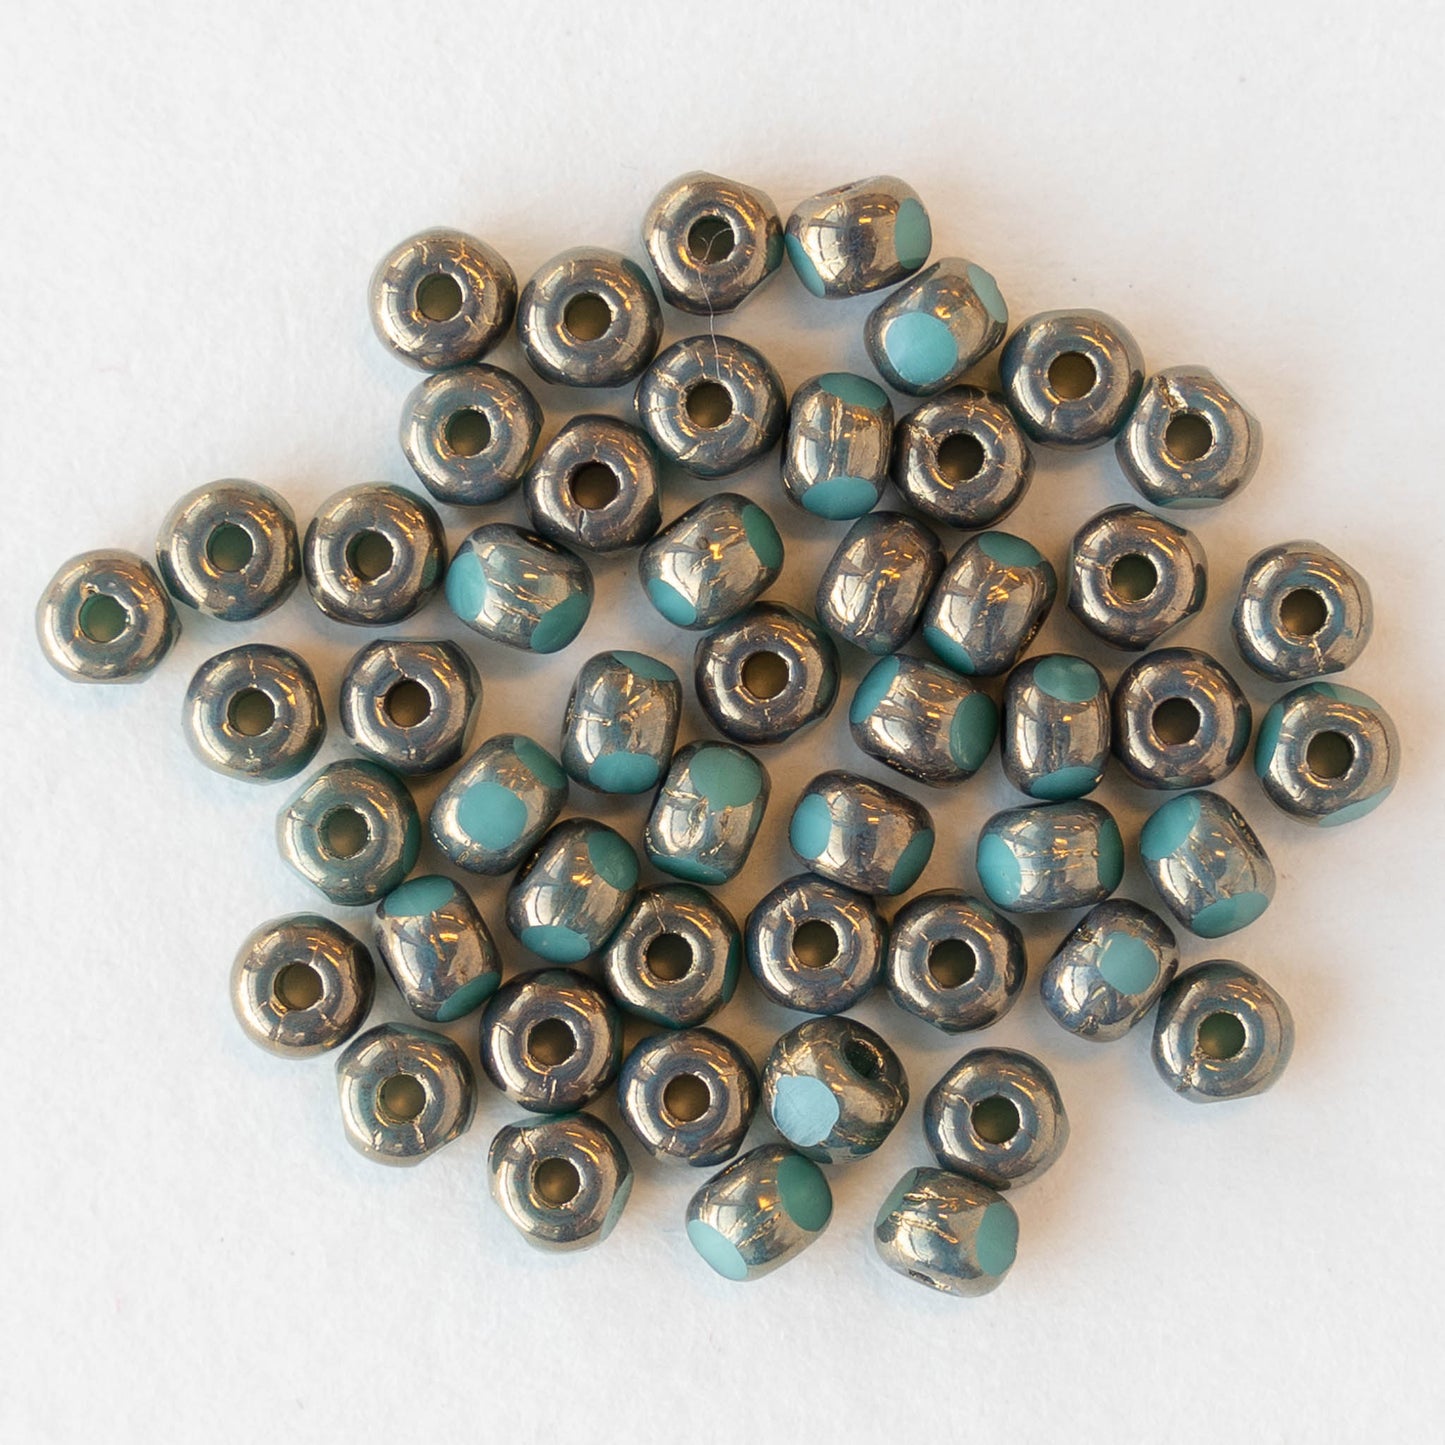 6/0 Tri-cut Seed Beads - Opaque Turquoise with Bronze Finish - 50